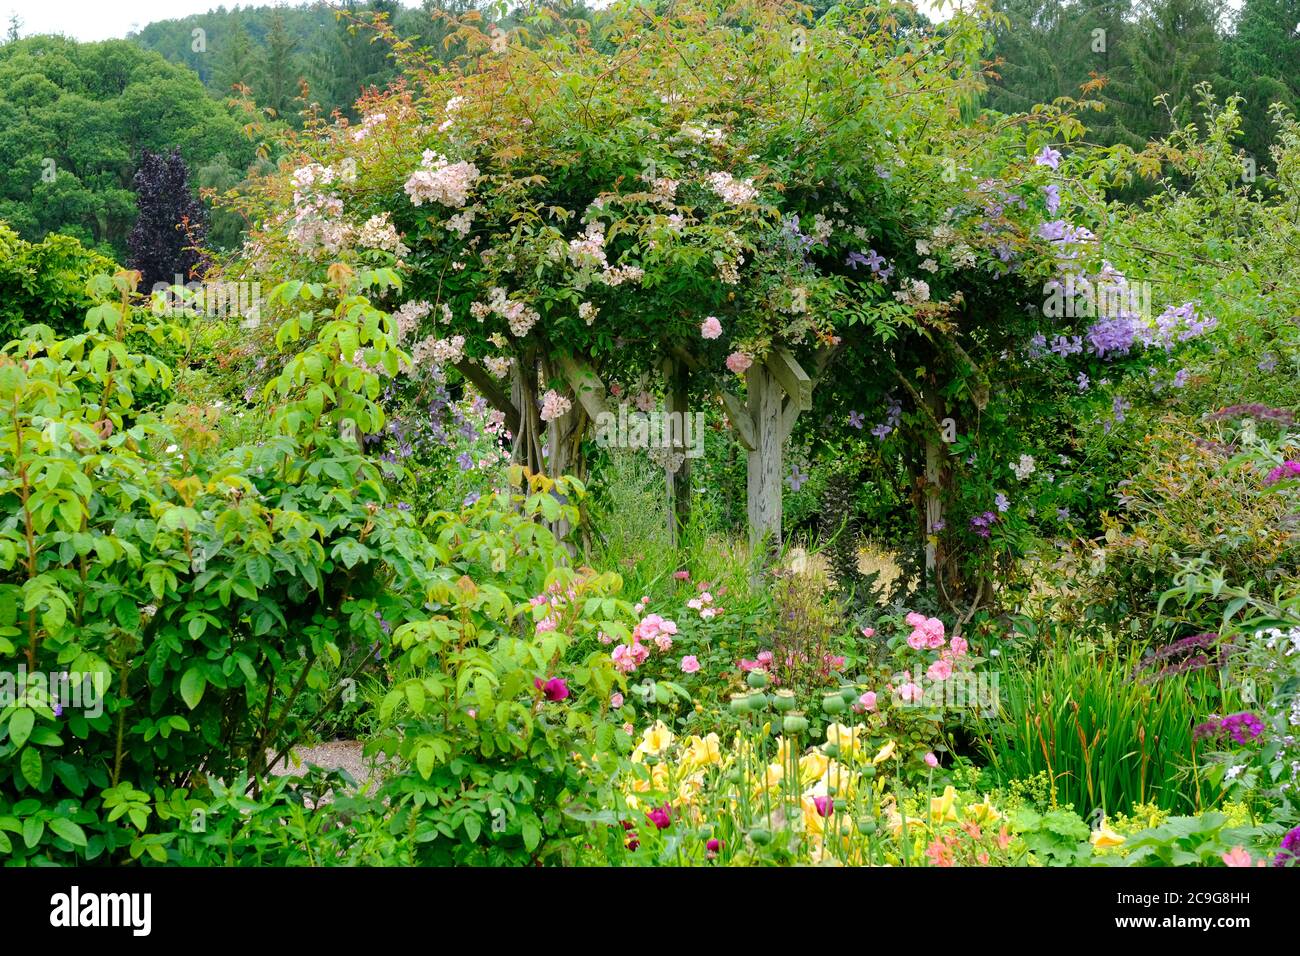 Lush English flower border and an old wooden trellis with roses and clematis - John Gollop Stock Photo